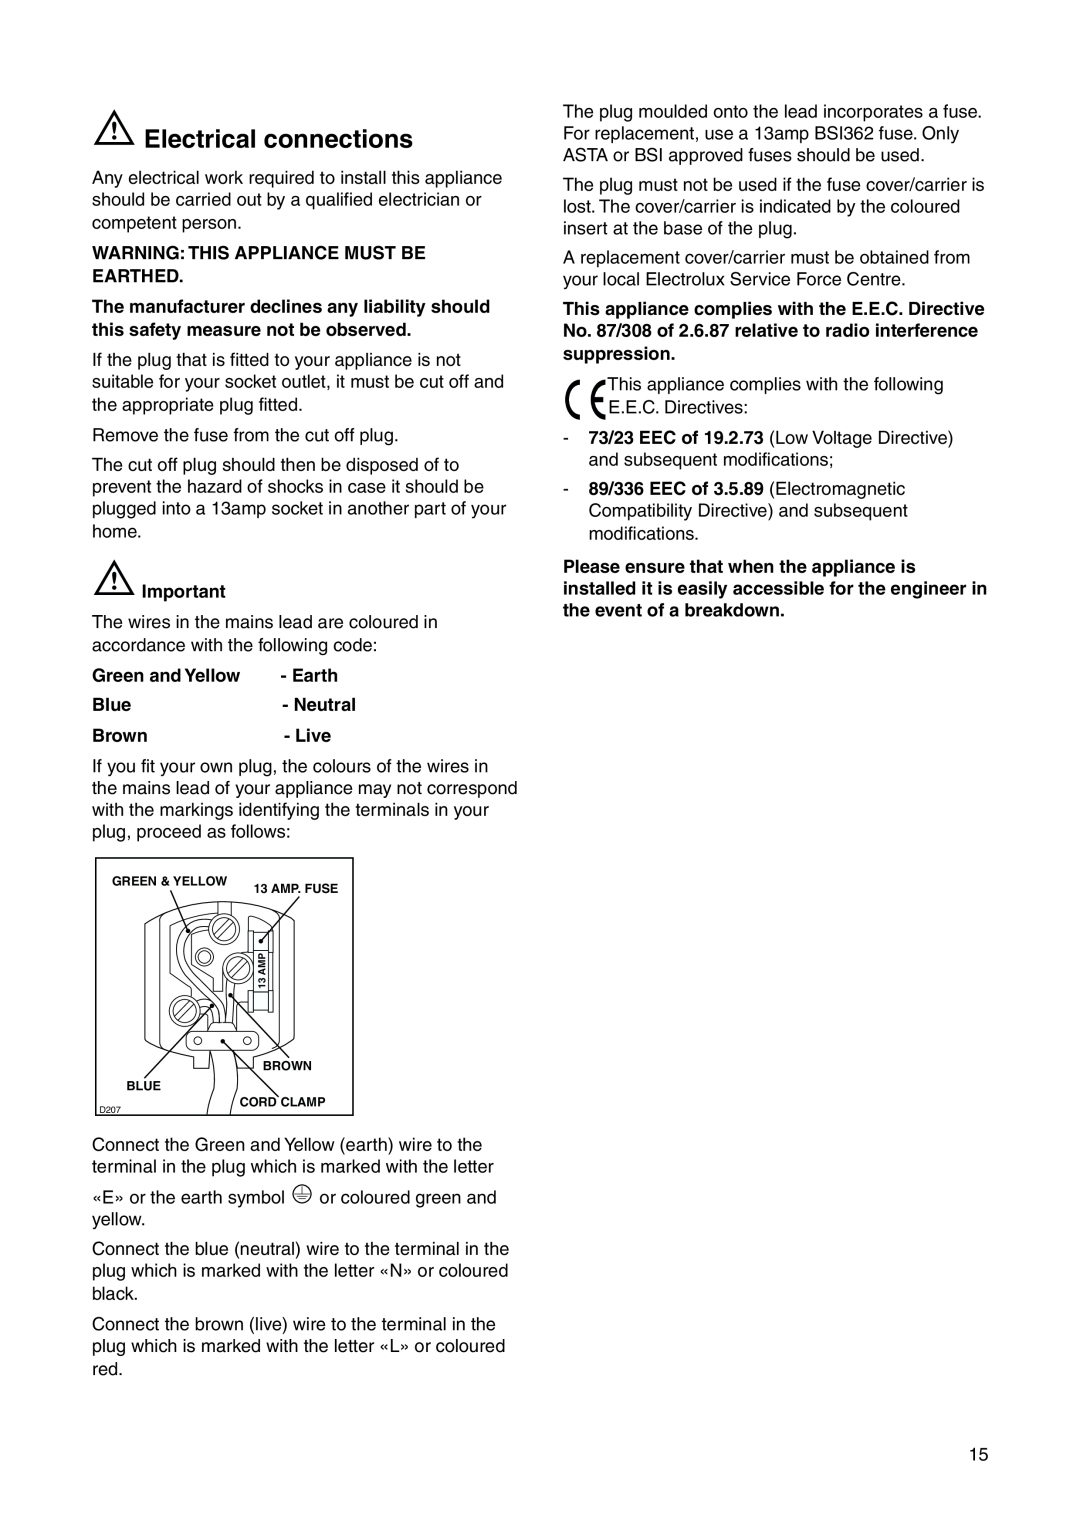 Electrolux ERF 2831 manual Electrical connections, Warning This Appliance Must Be Earthed, Green and Yellow 